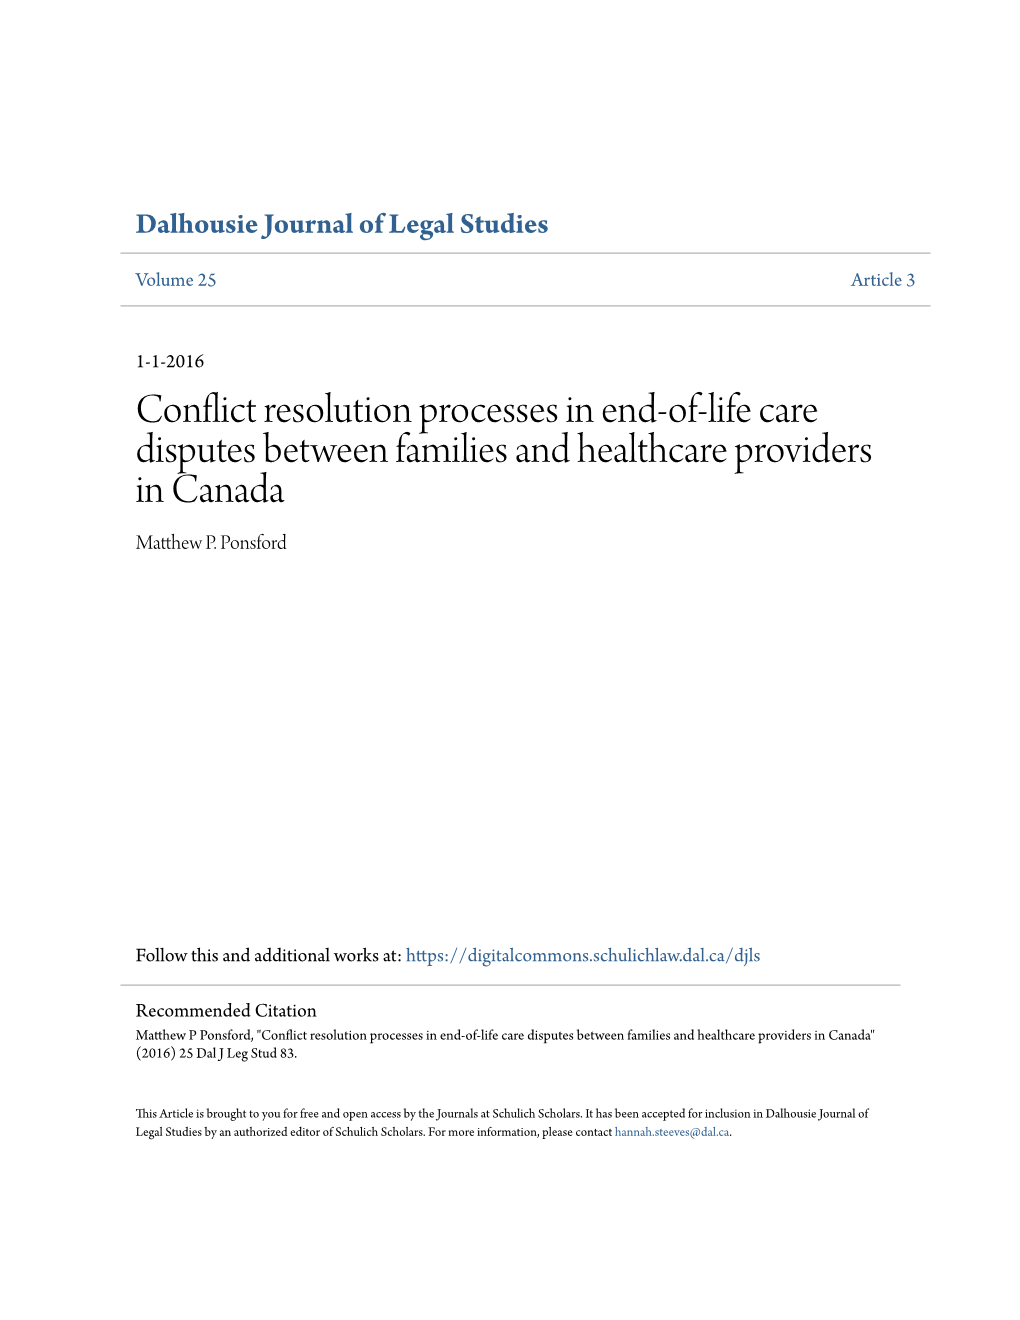 Conflict Resolution Processes in End-Of-Life Care Disputes Between Families and Healthcare Providers in Canada Matthew .P Ponsford